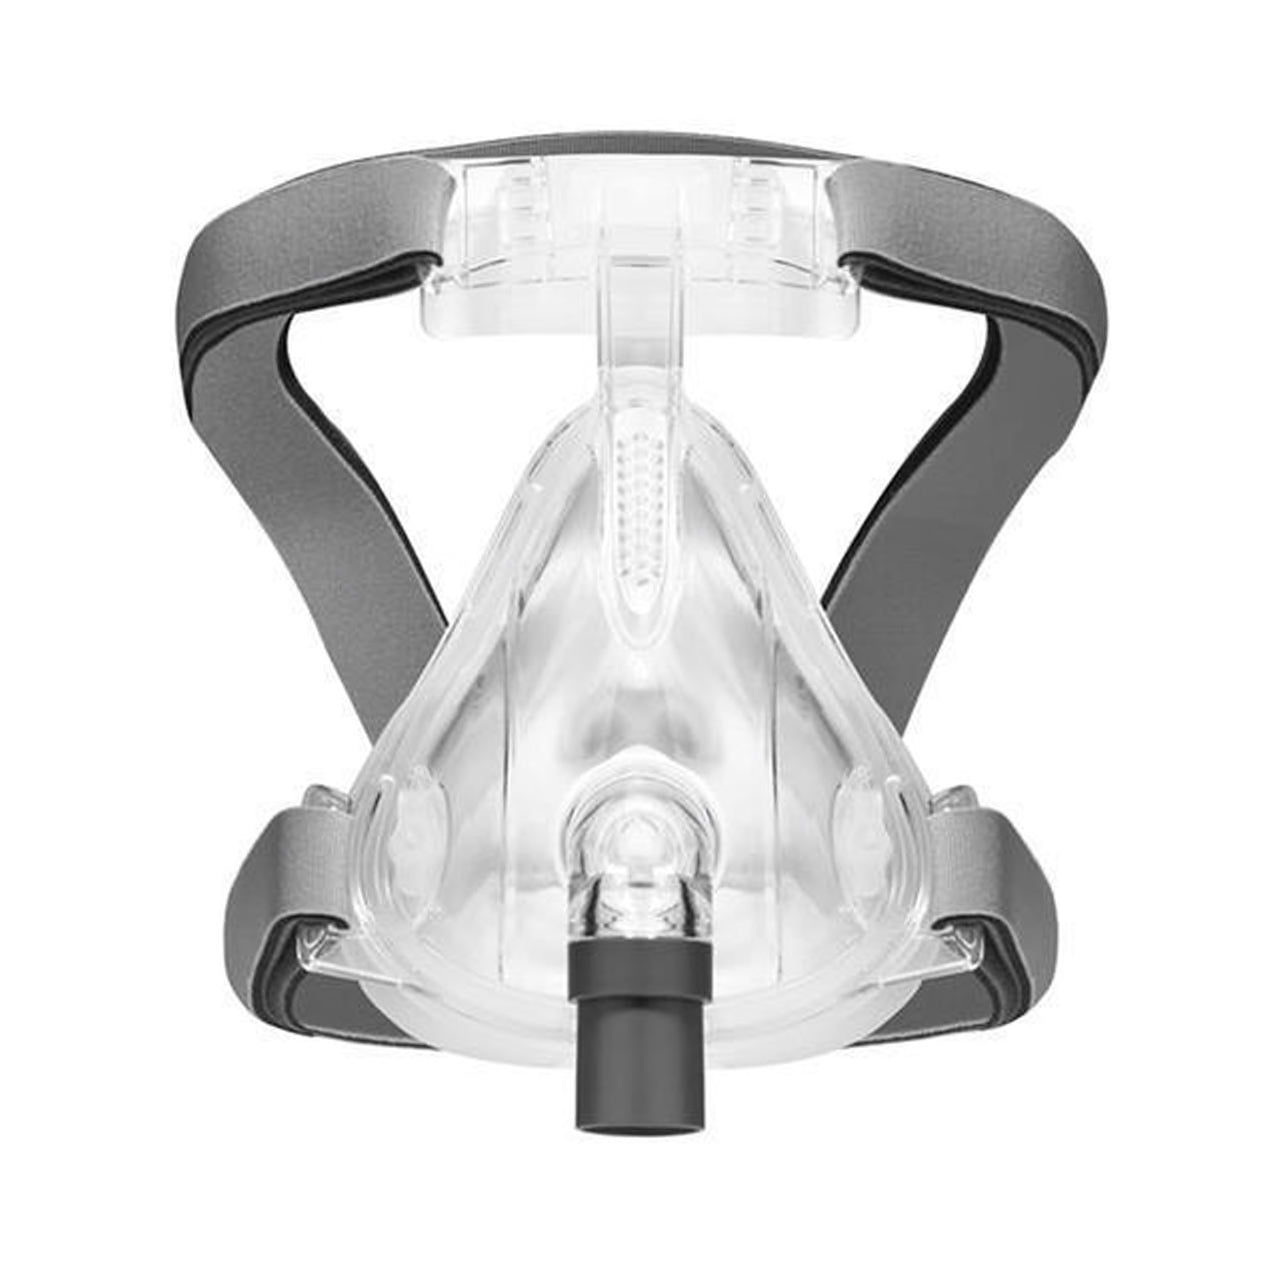 Front view of Numa Full Face Mask with grey headgear.